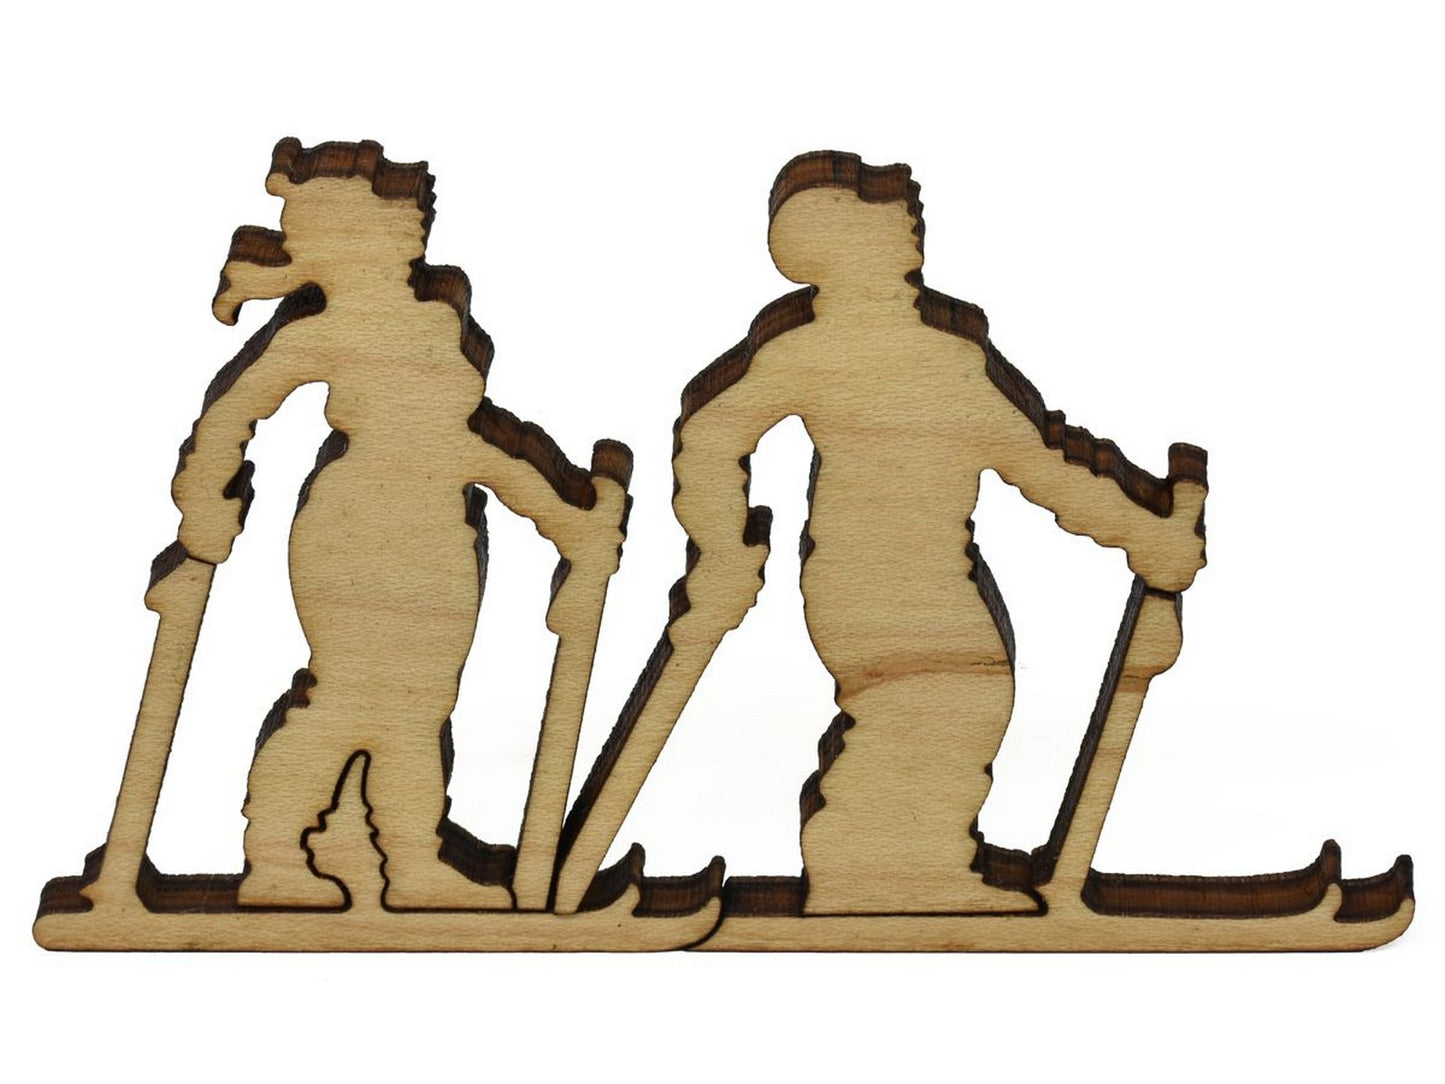 A closeup of pieces showing two cross country skiers.